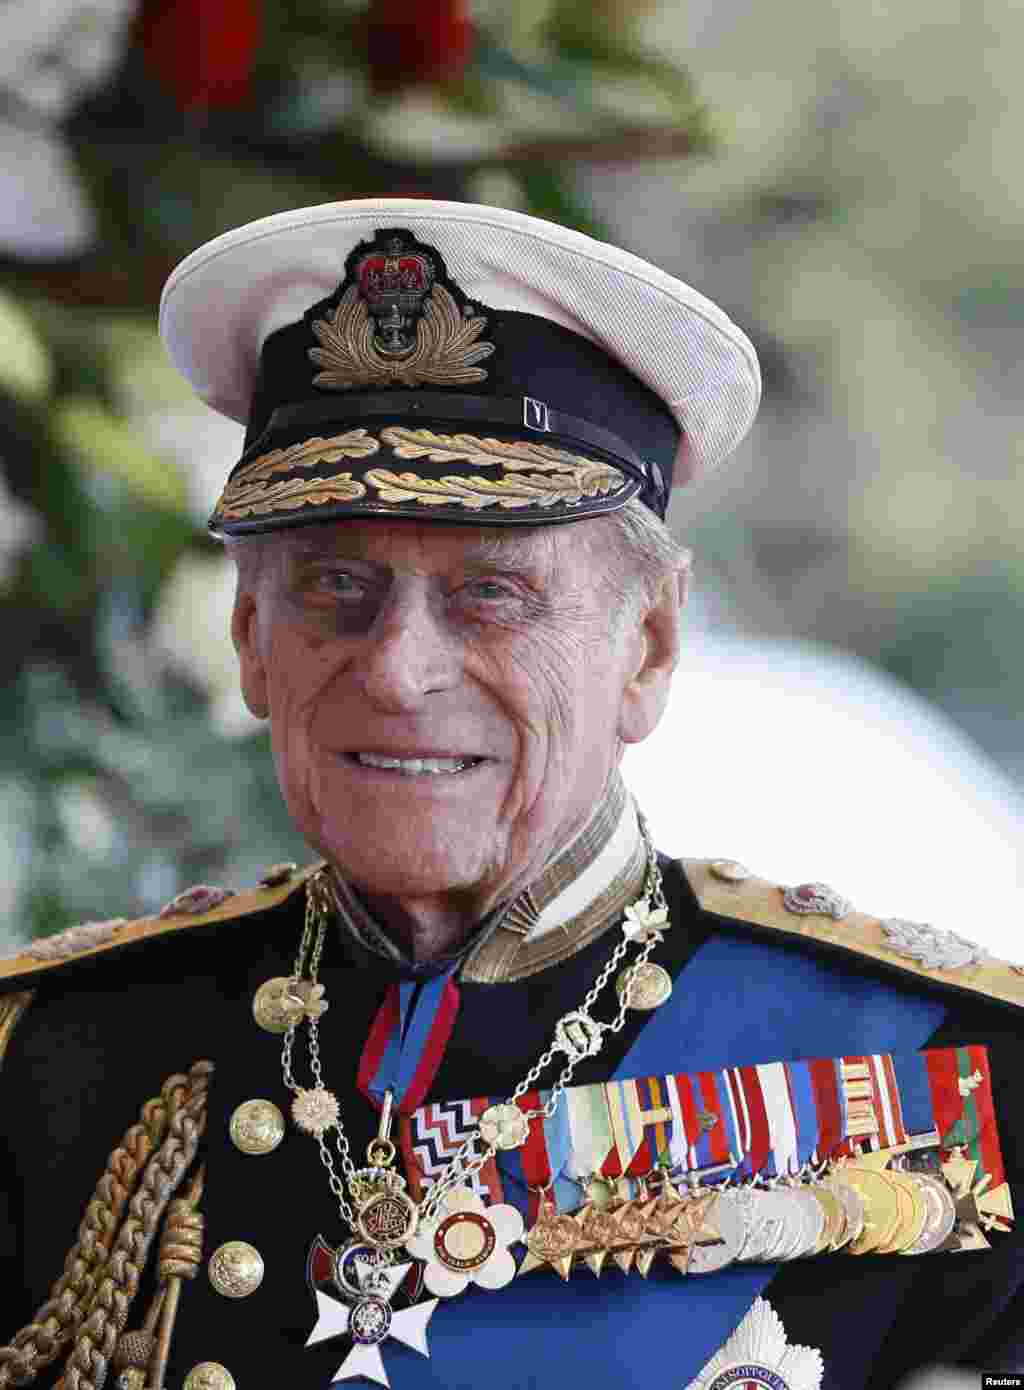 Britain's Prince Philip is pictured Windsor, England April 30, 2013. 